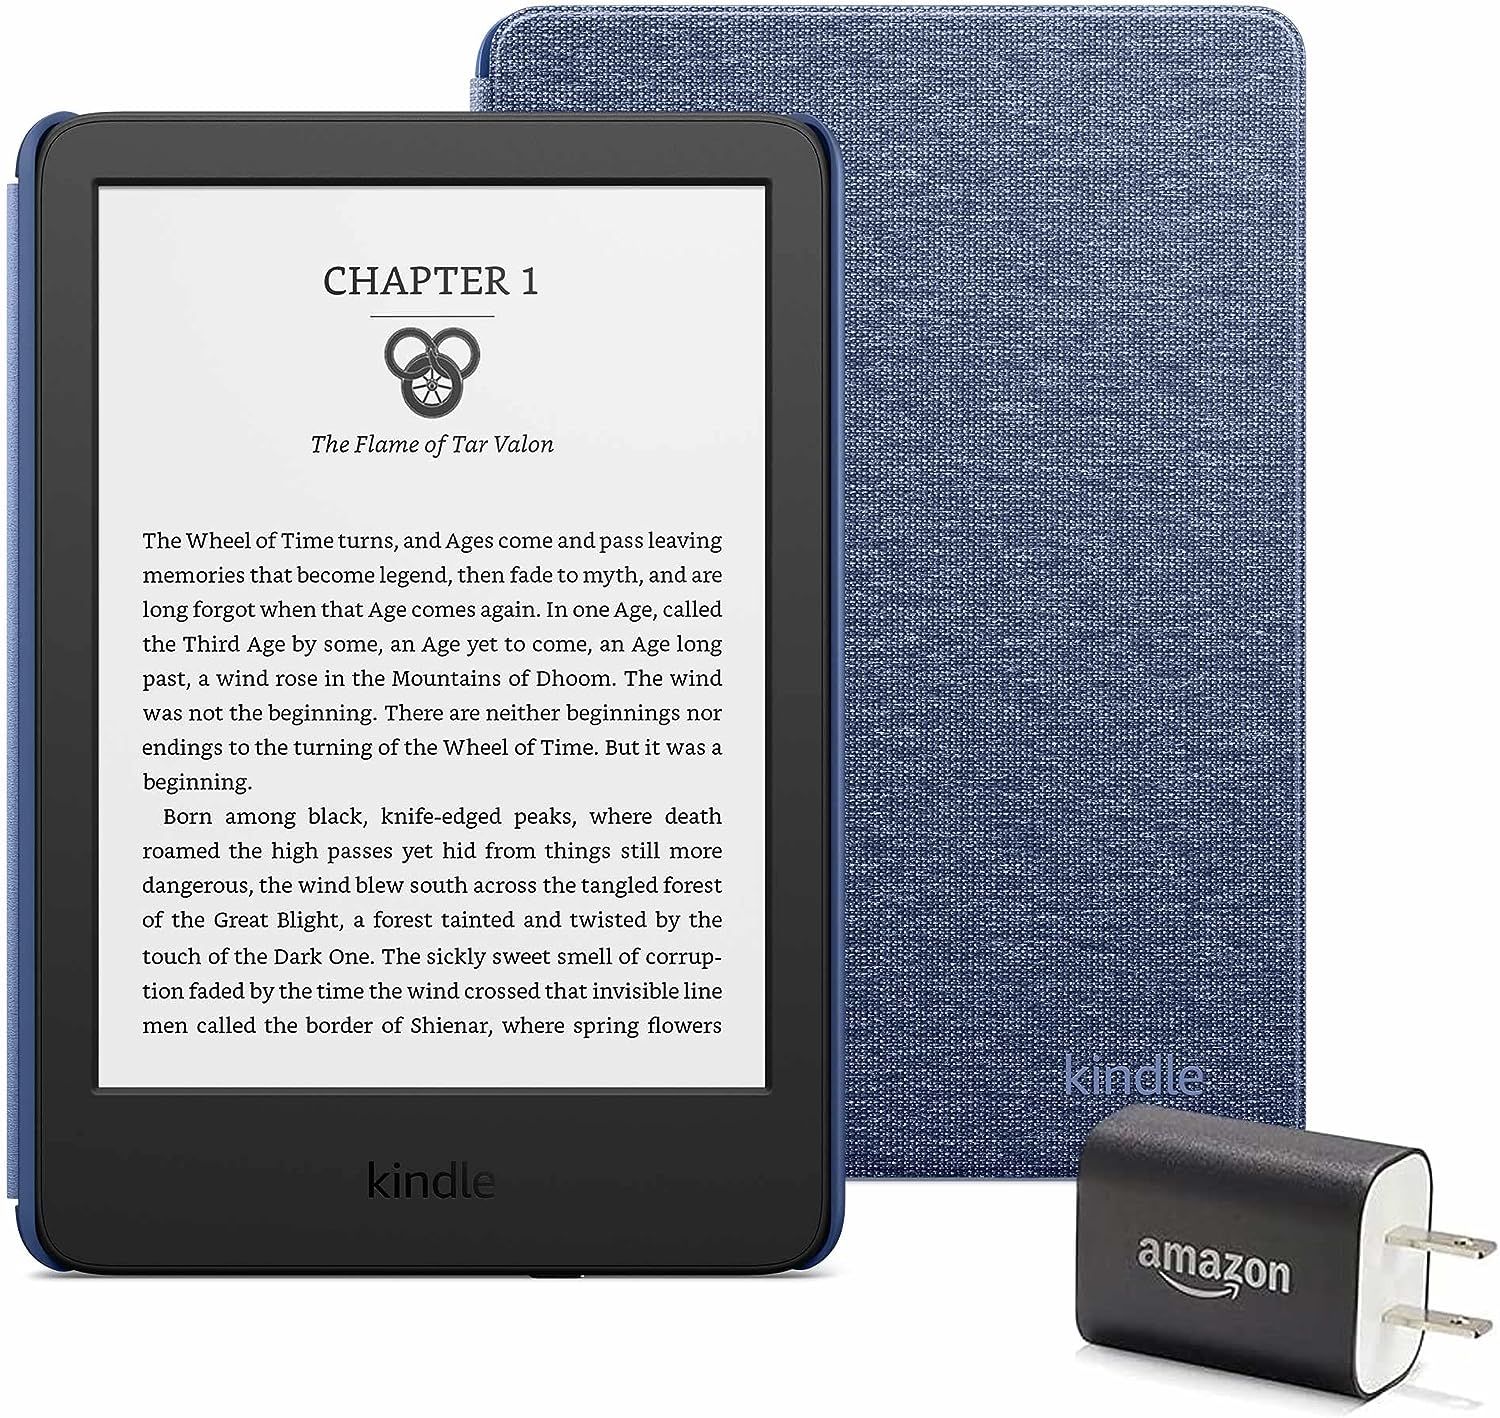 Kindle Essentials Bundle including Kindle (2022 release) - Black, Fabric Cover - Denim, and Power... | Amazon (US)